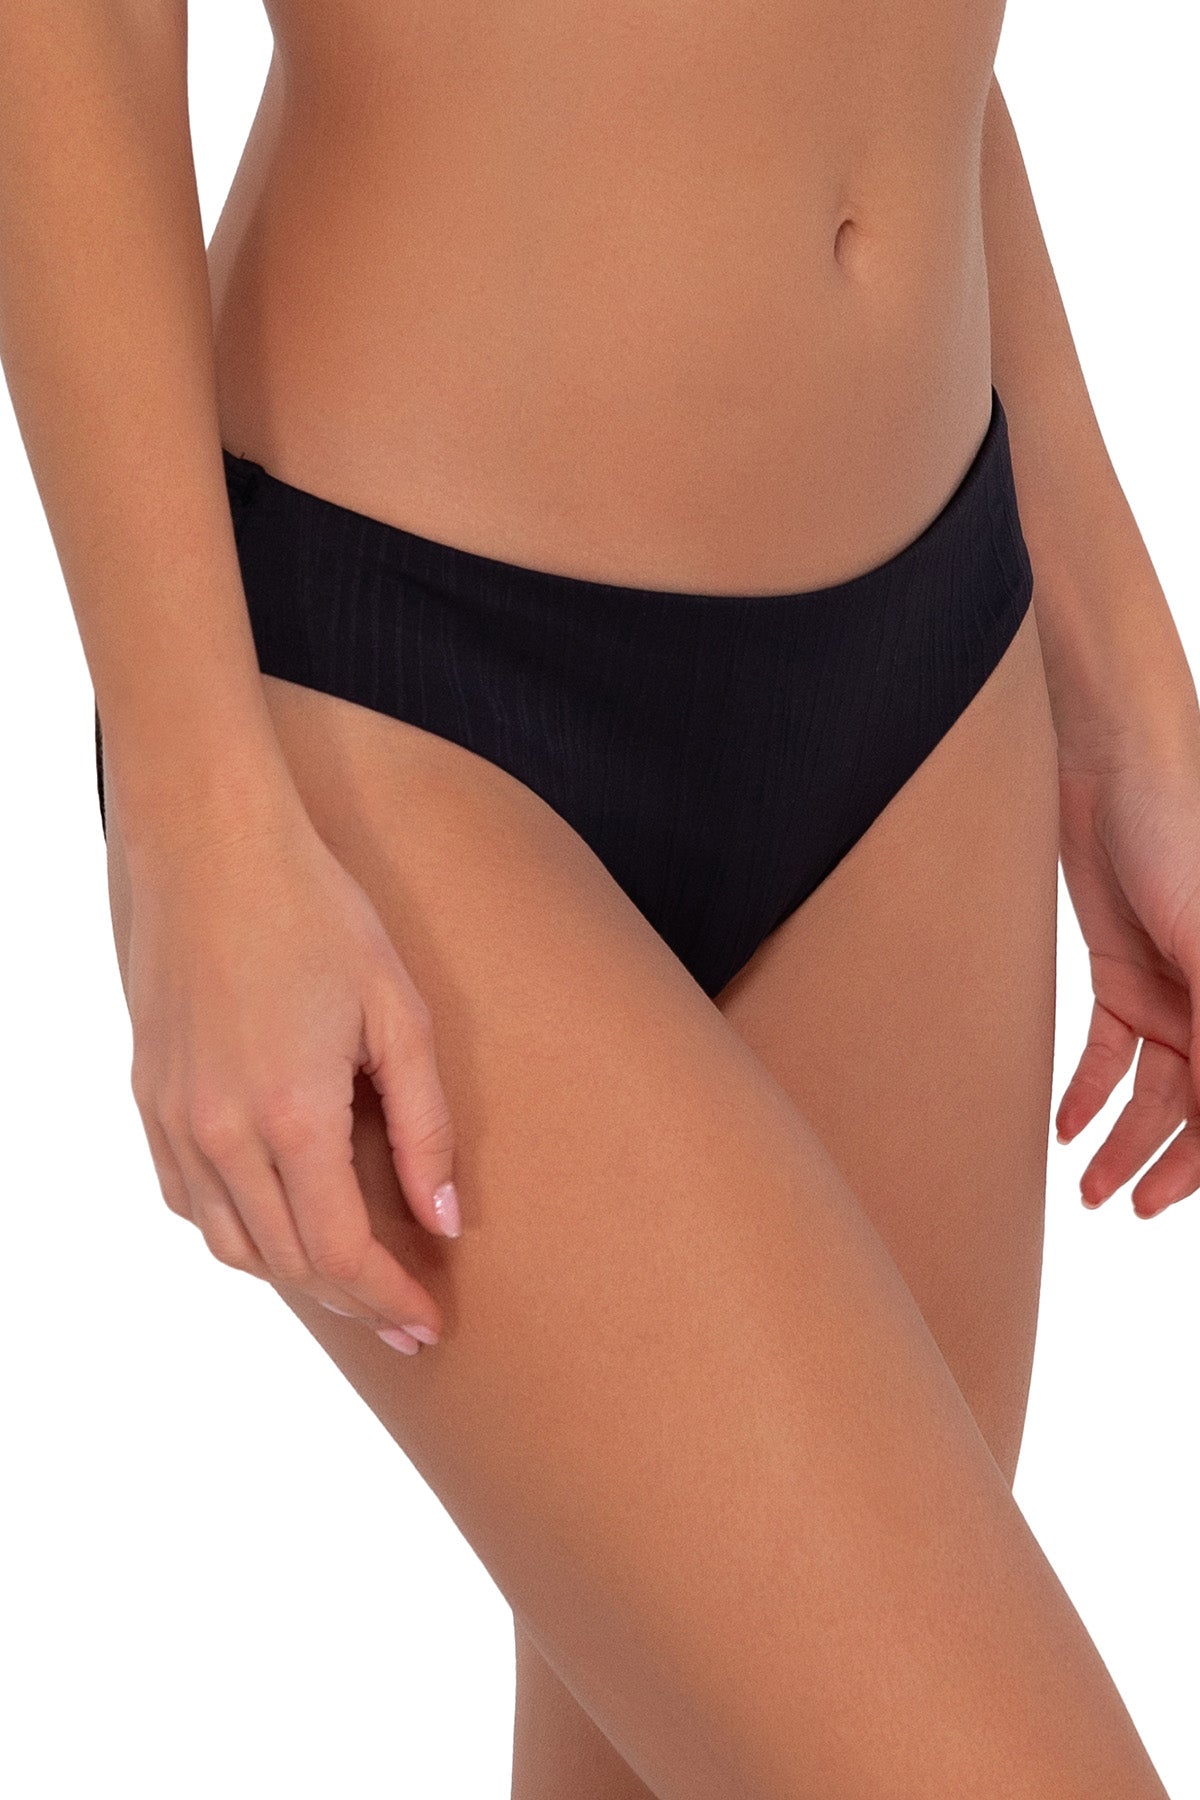 Side pose #1 of Gigi wearing Sunsets Black Seagrass Texture Collins Hipster Bottom